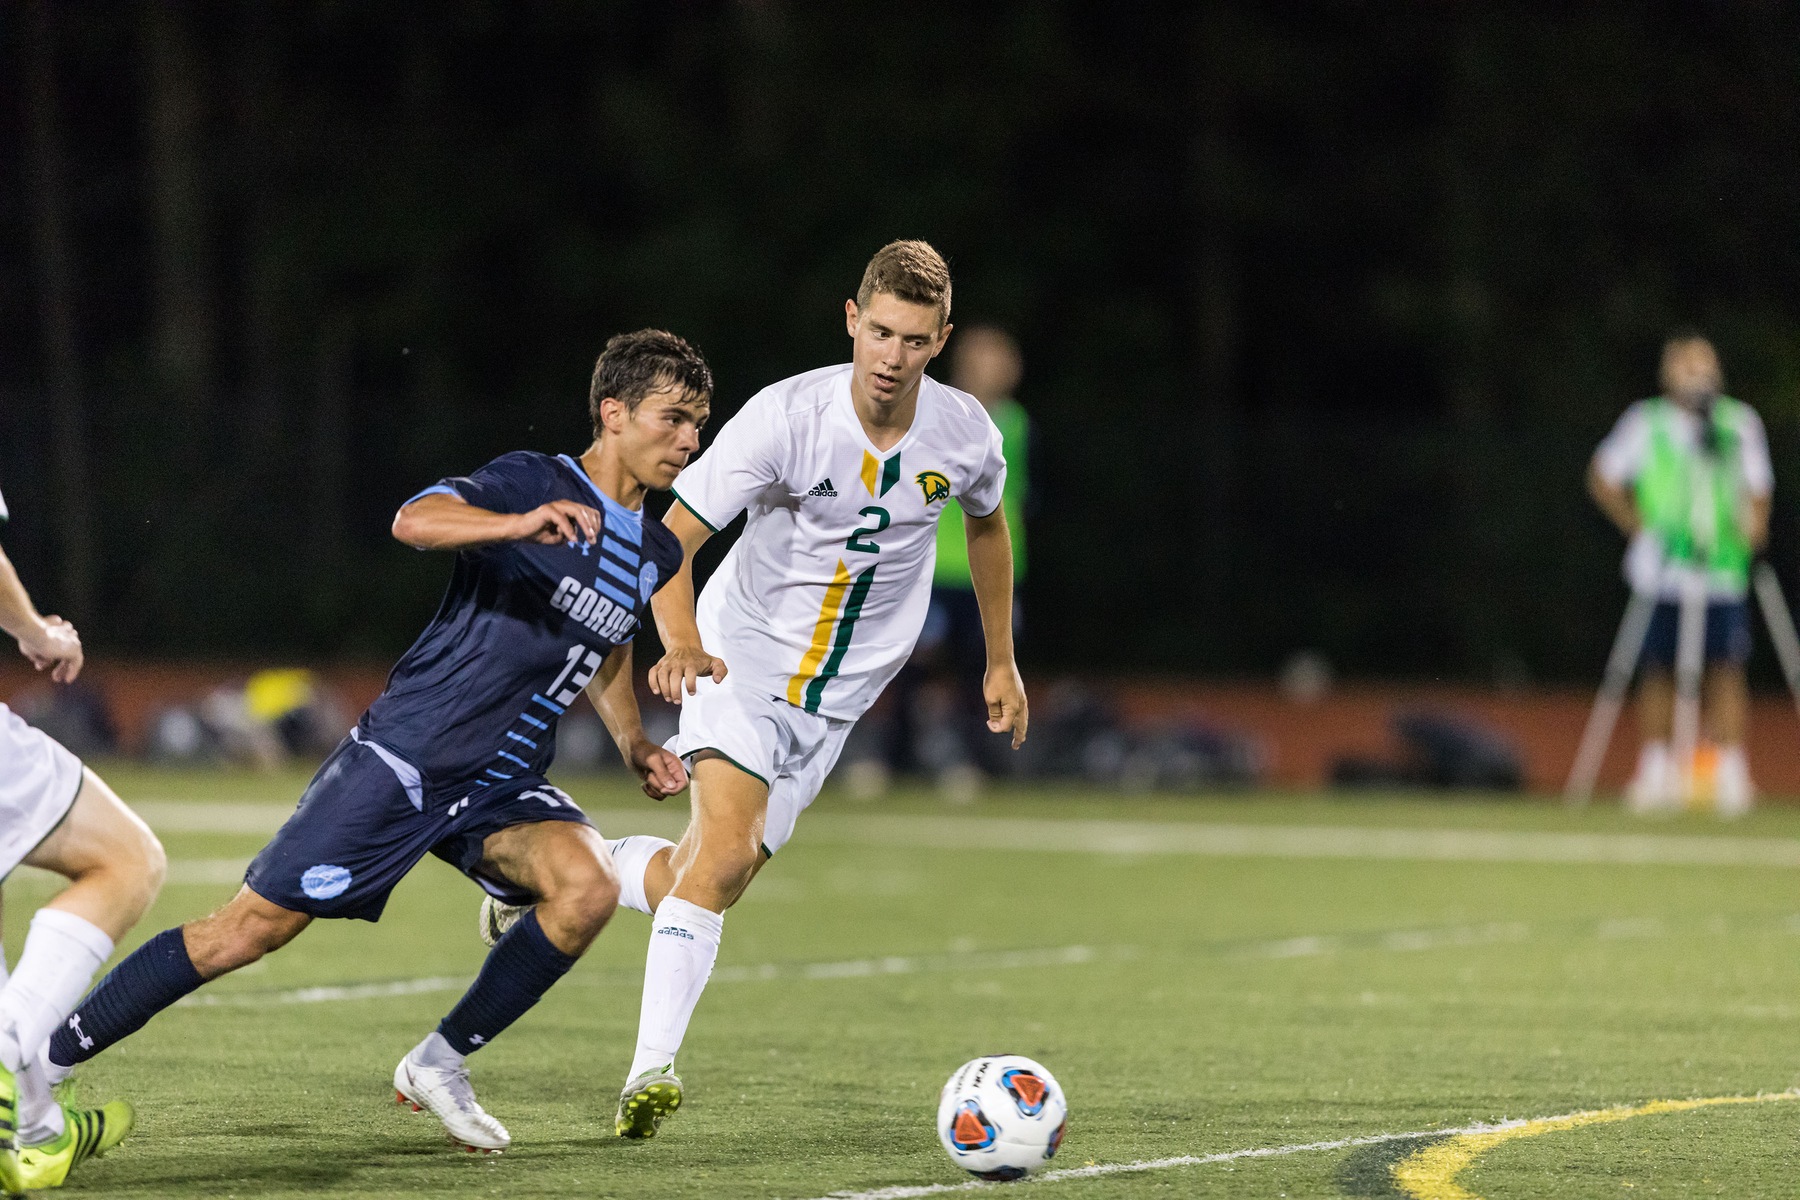 Falcons Race Past Hawks in Non-Conference Action, 1-0